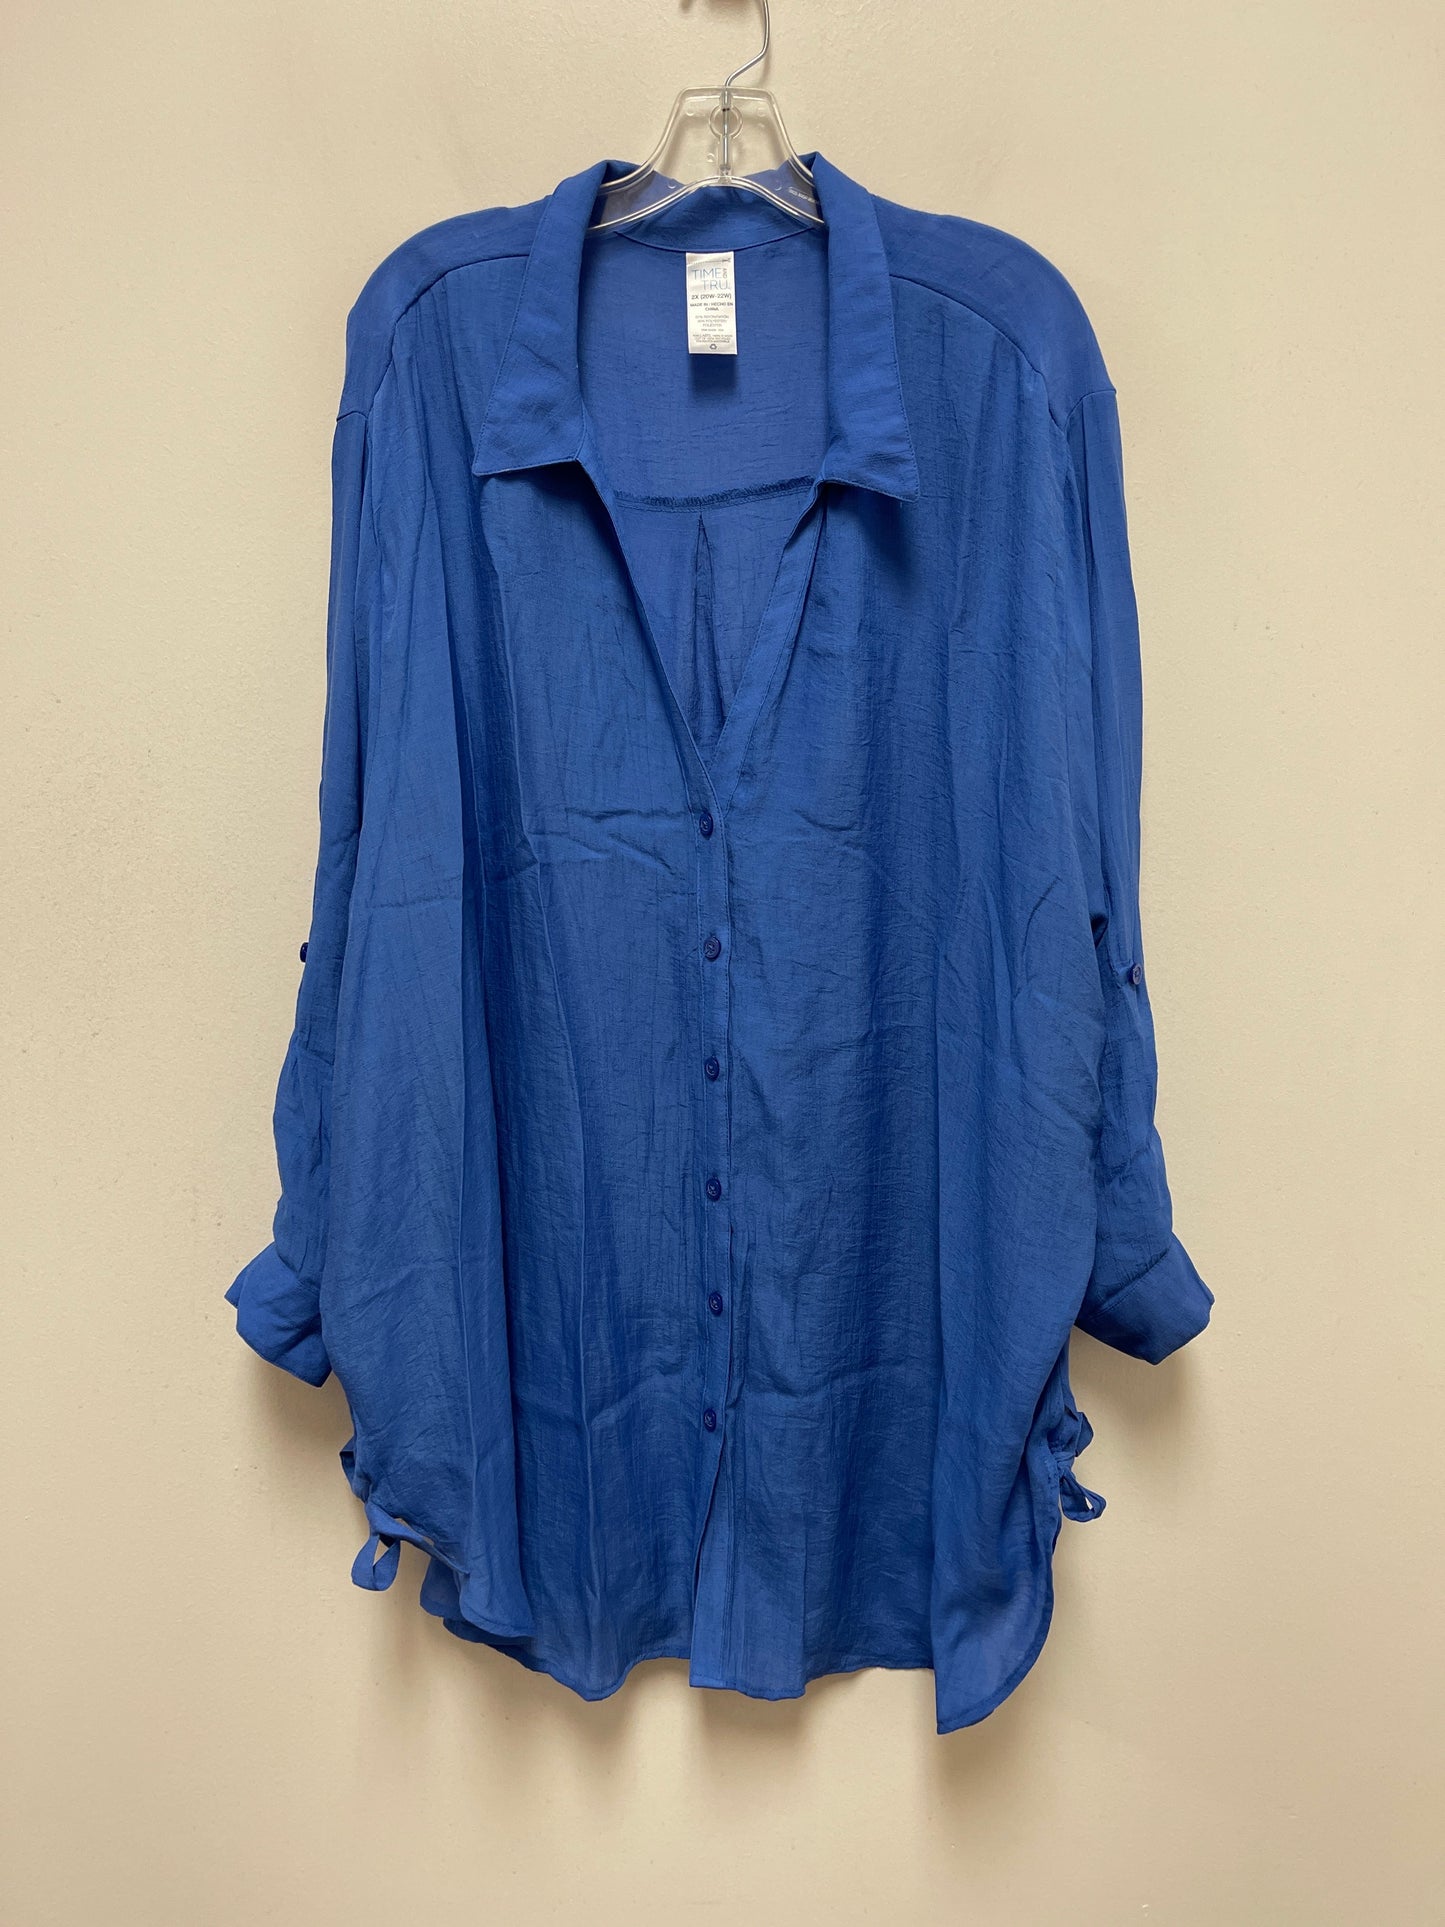 Blue Blouse Long Sleeve Time And Tru, Size 2x